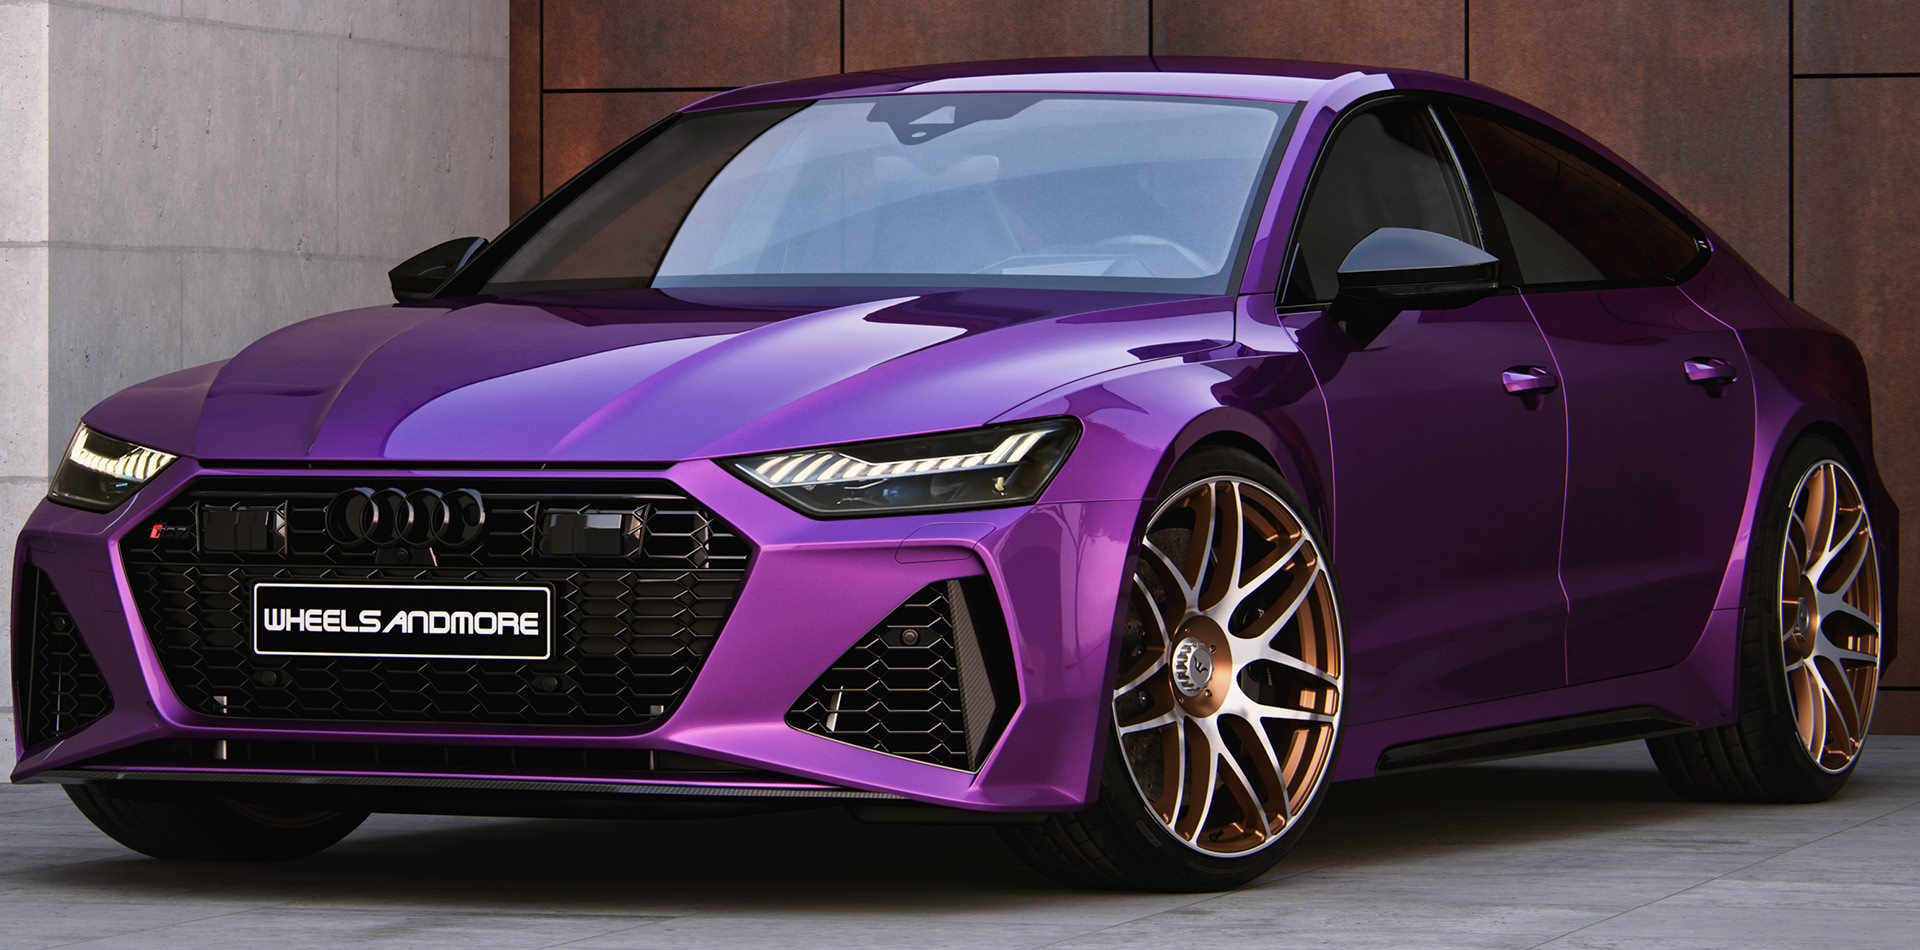 This 1000hp Audi RS7 C8 Wants to Take on the GT63 S AMG E Performance